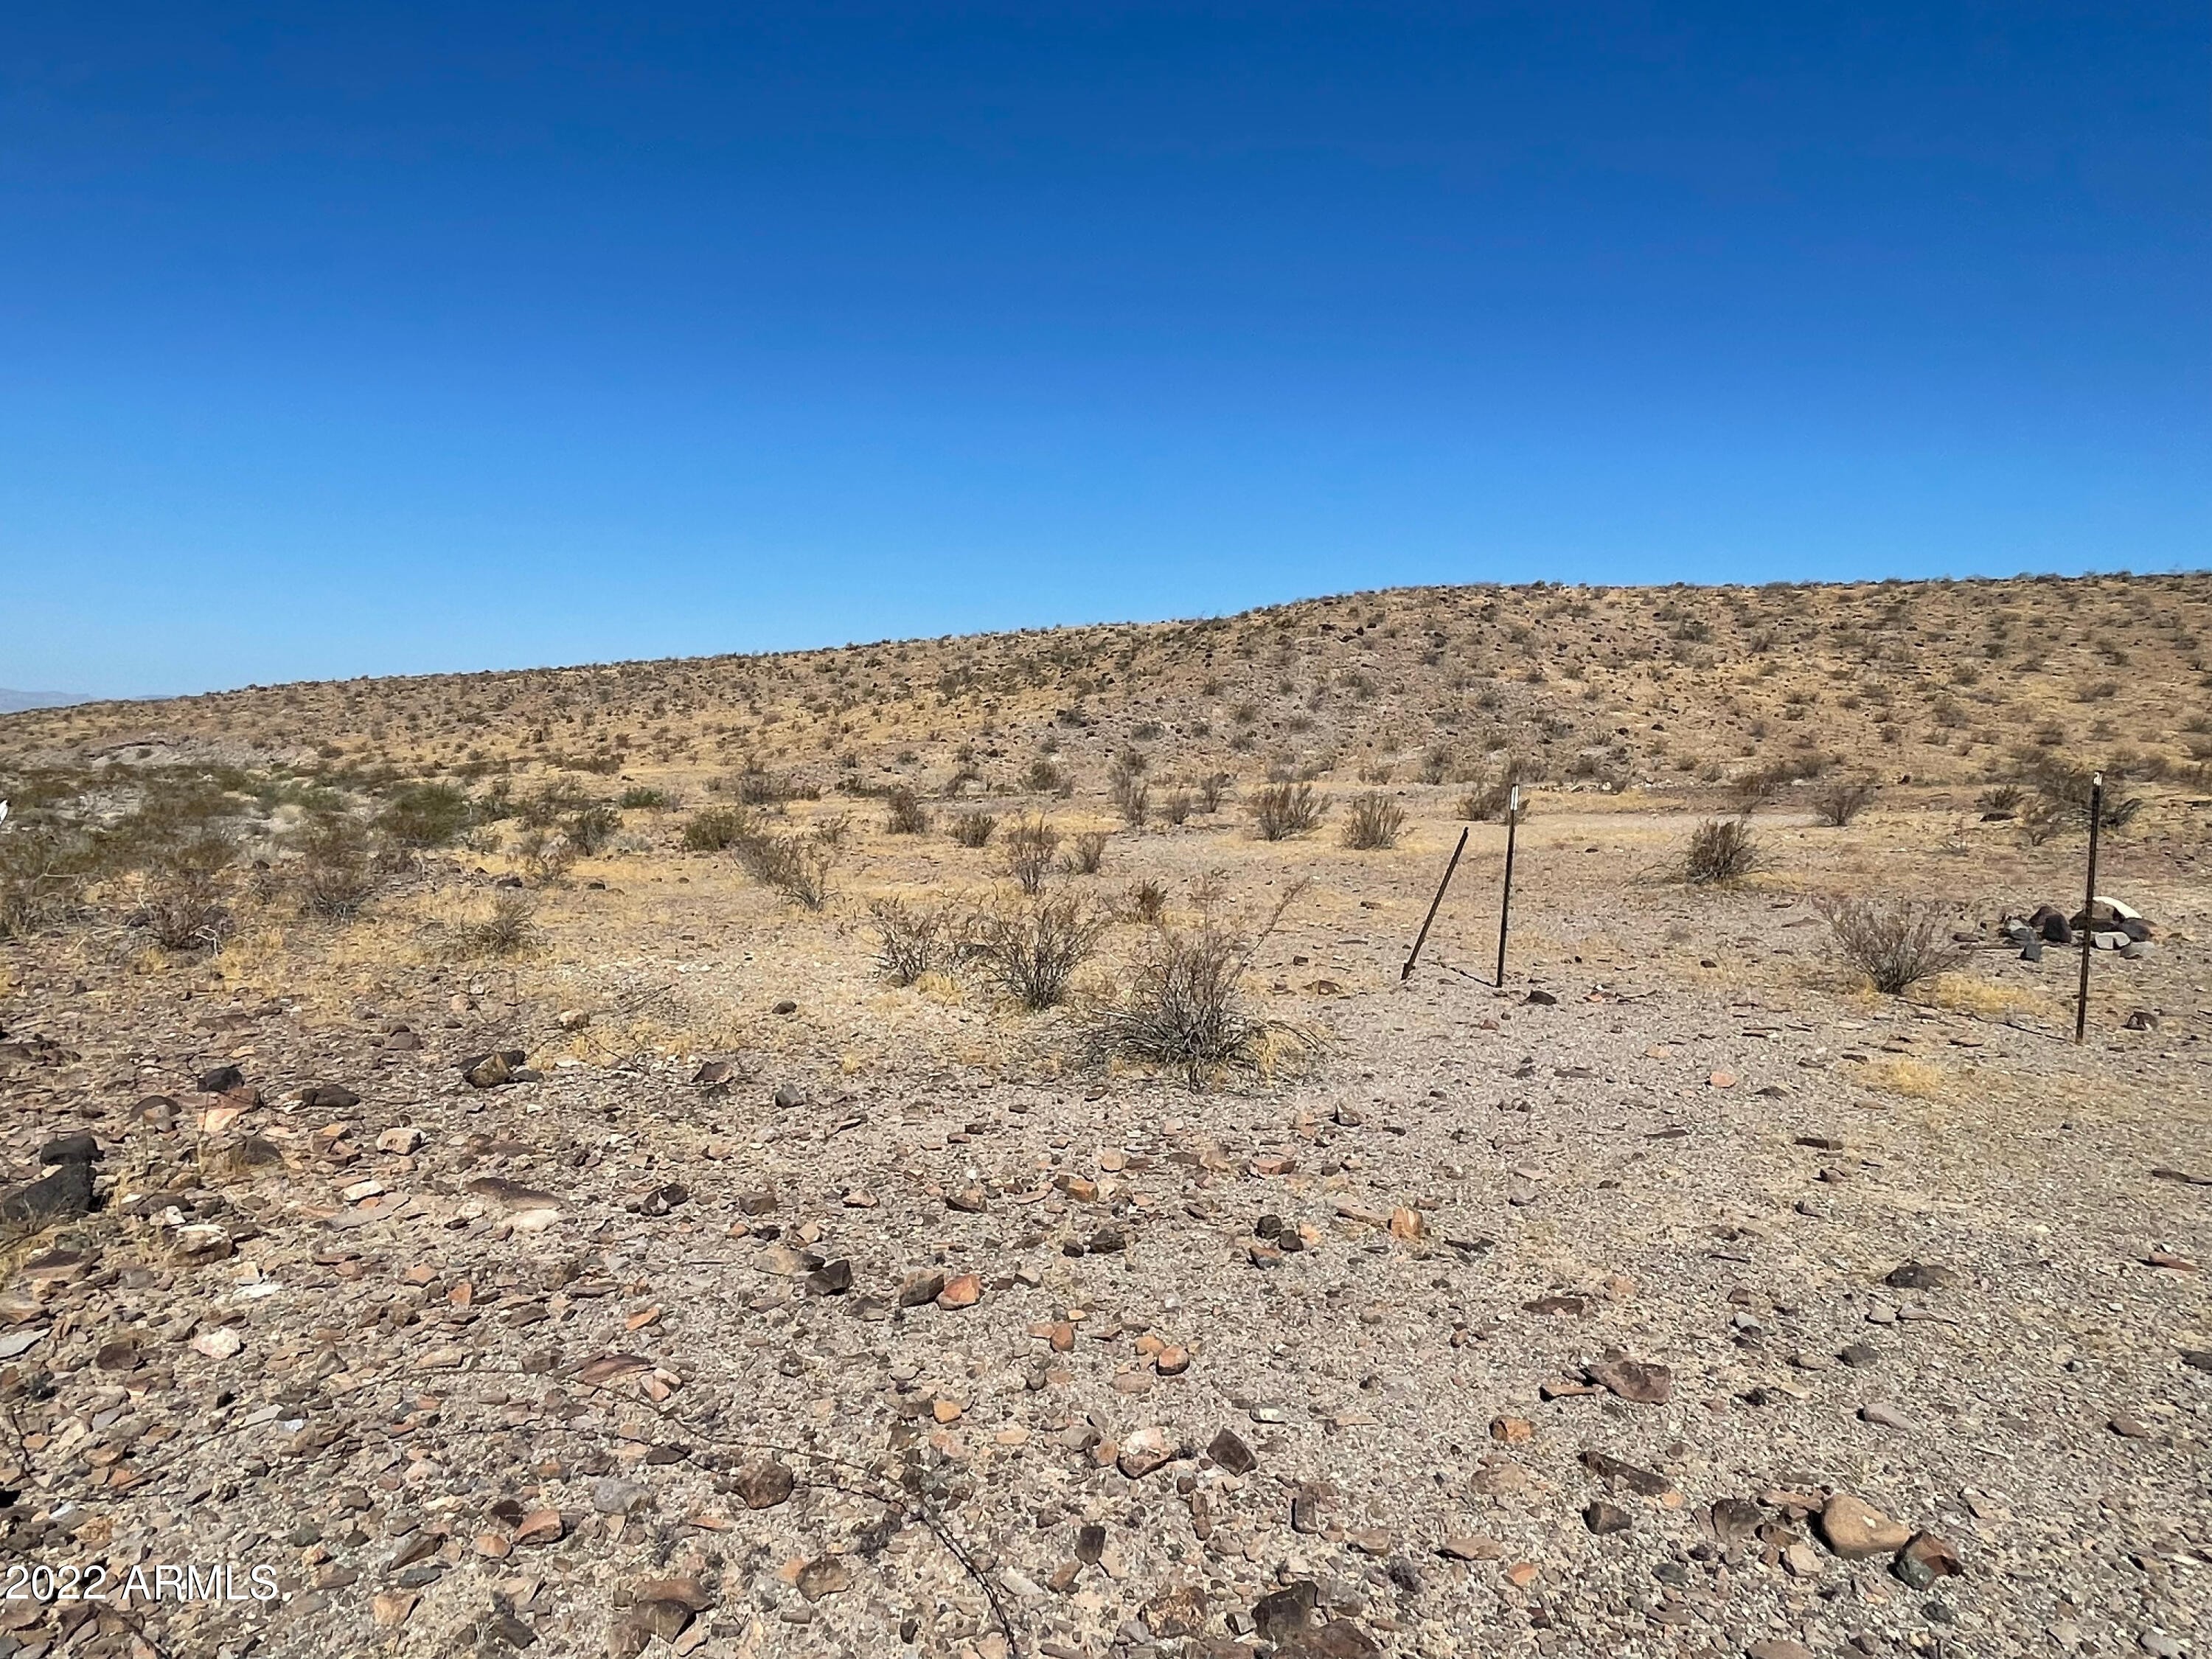 5. 000 282 Acres Mohave Milltown Trail